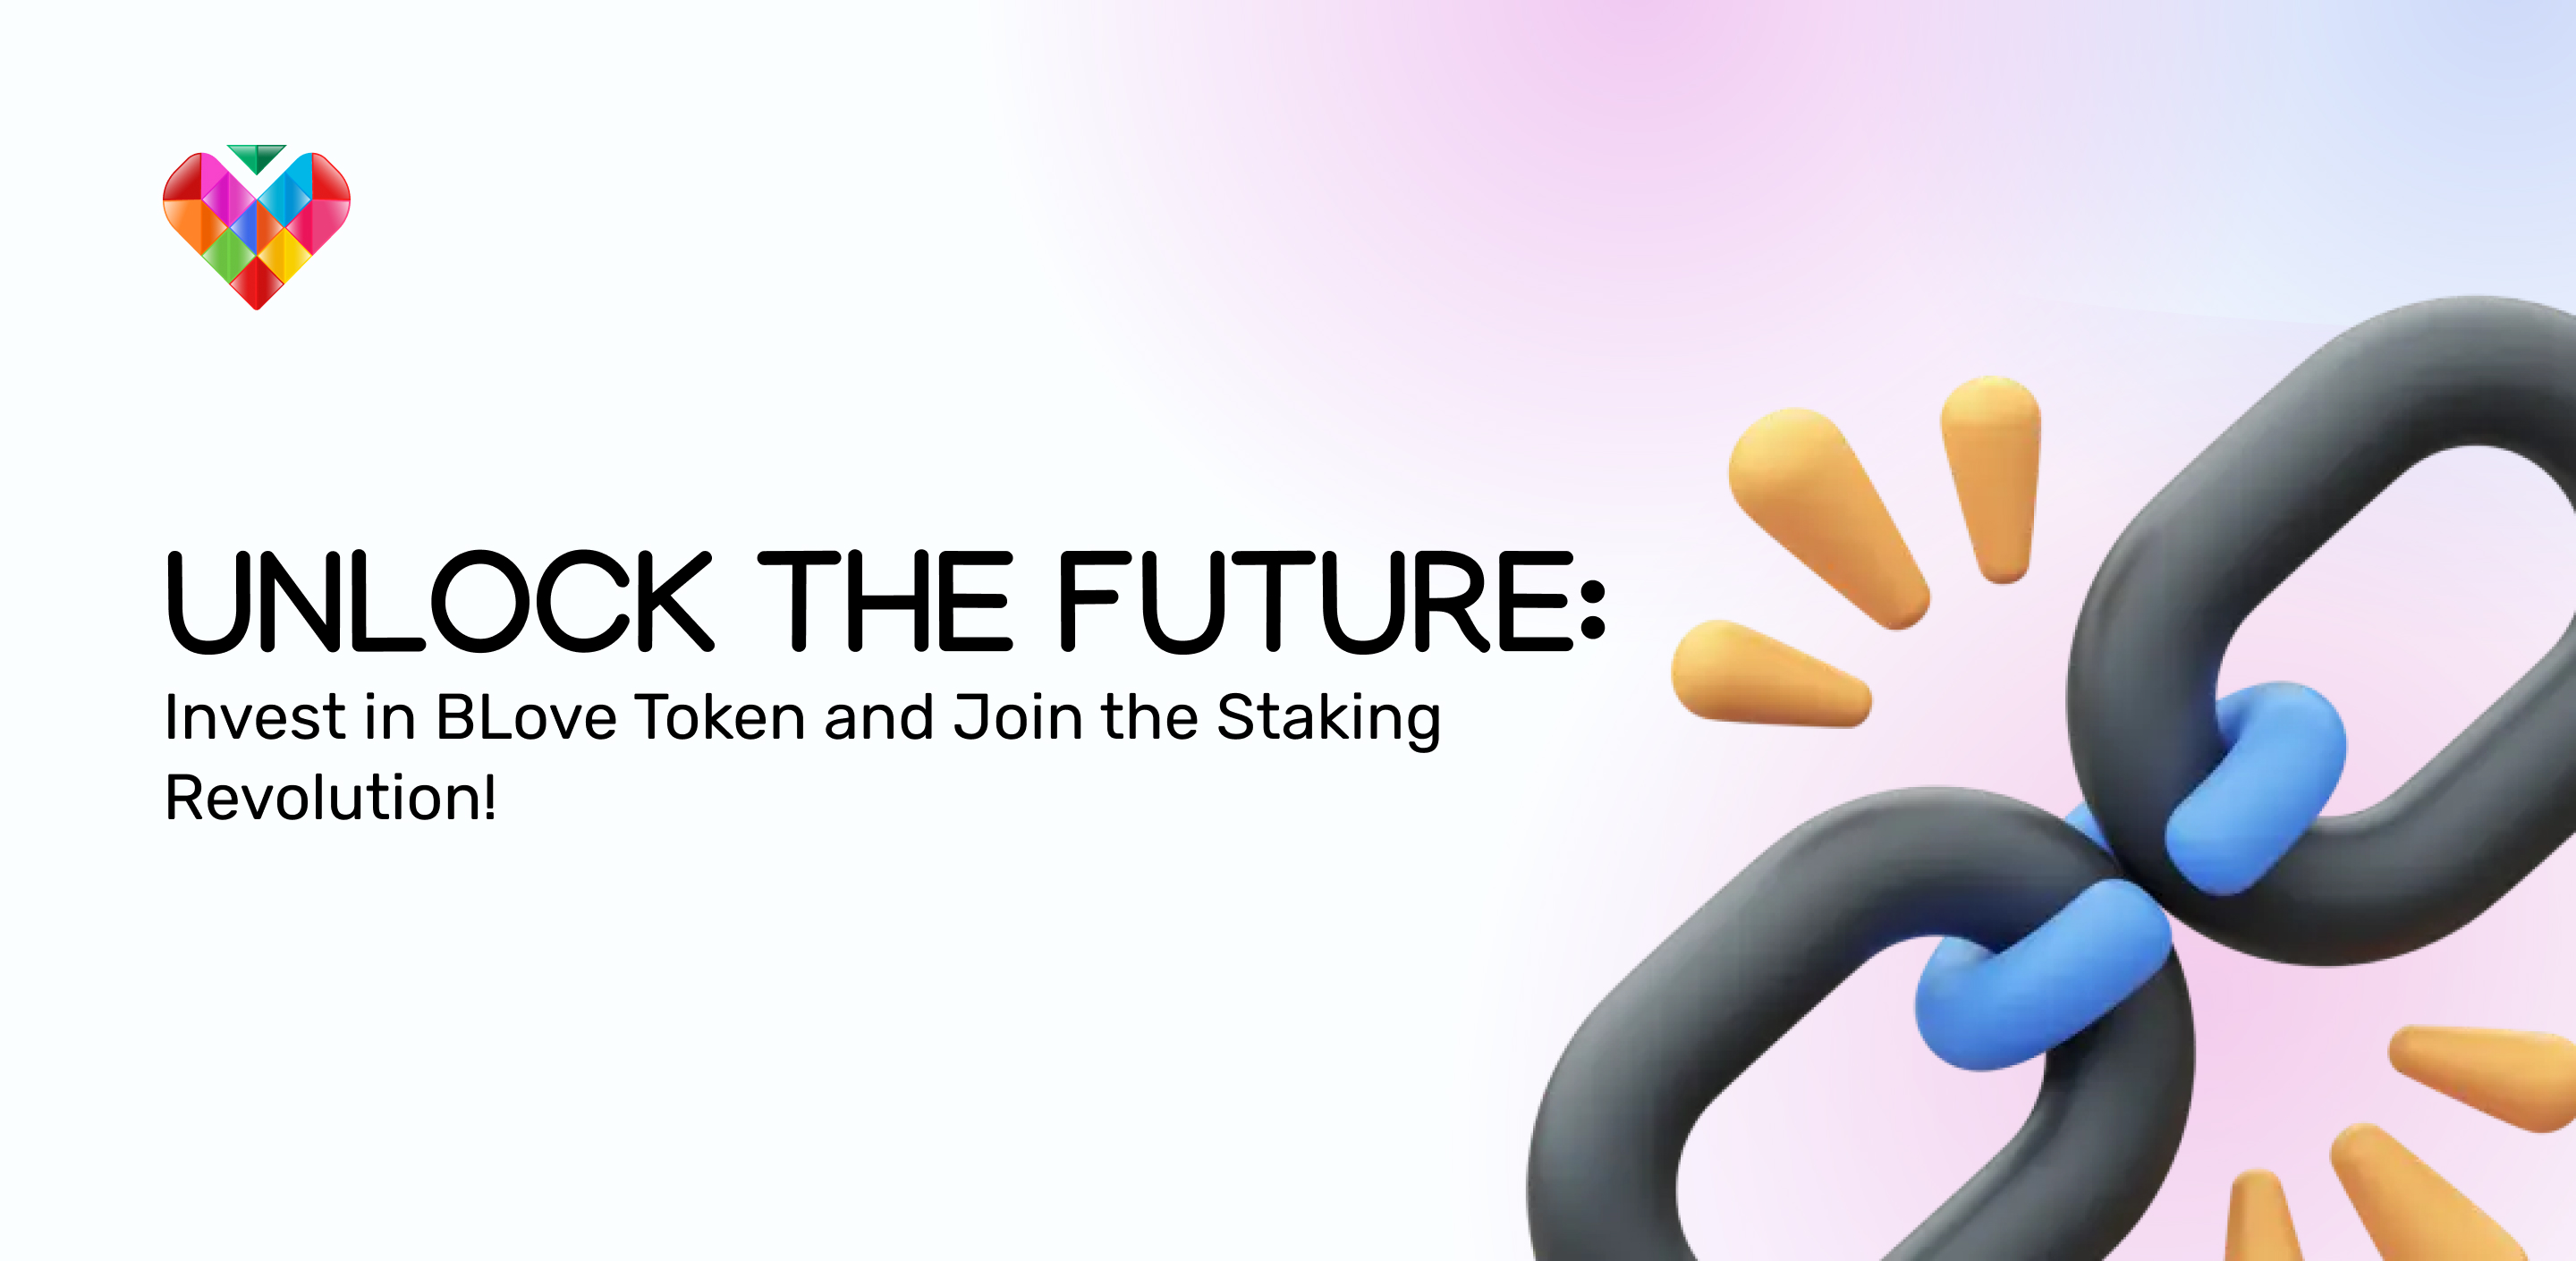 Invest in BLove Token and Join the Staking Revolution today!